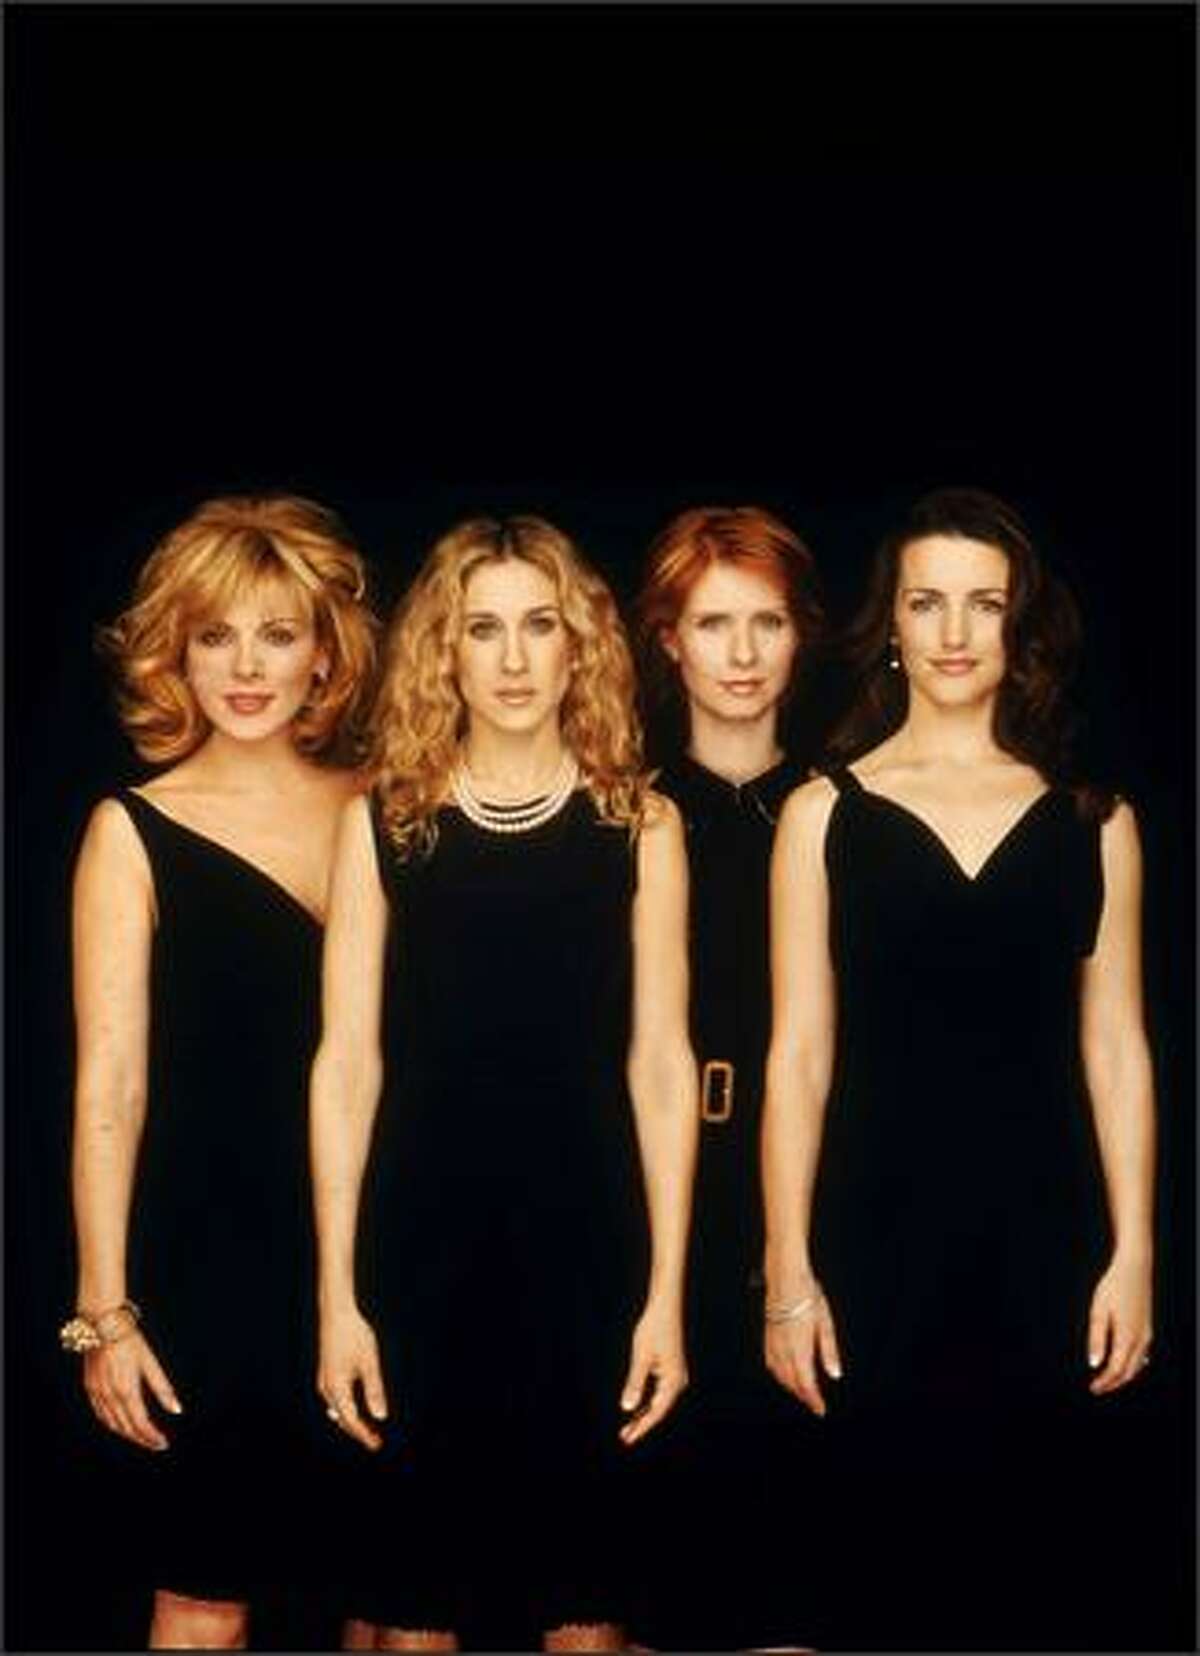 From left, Kim Cattrall as "Samantha Jones," Sarah Jessica Parker as "Carrie Bradshaw," Cynthia Nixon as "Miranda Hobbs" and Kristin Davis as "Charlotte York" pose for a promotional portrait for HBO, which aired "Sex and the City" for six seasons, beginning June 6, 1998. The series, which makes a comeback on May 30 with "Sex and the City: The Movie" in U.S. theaters, won seven Emmys and eight Golden Globes.